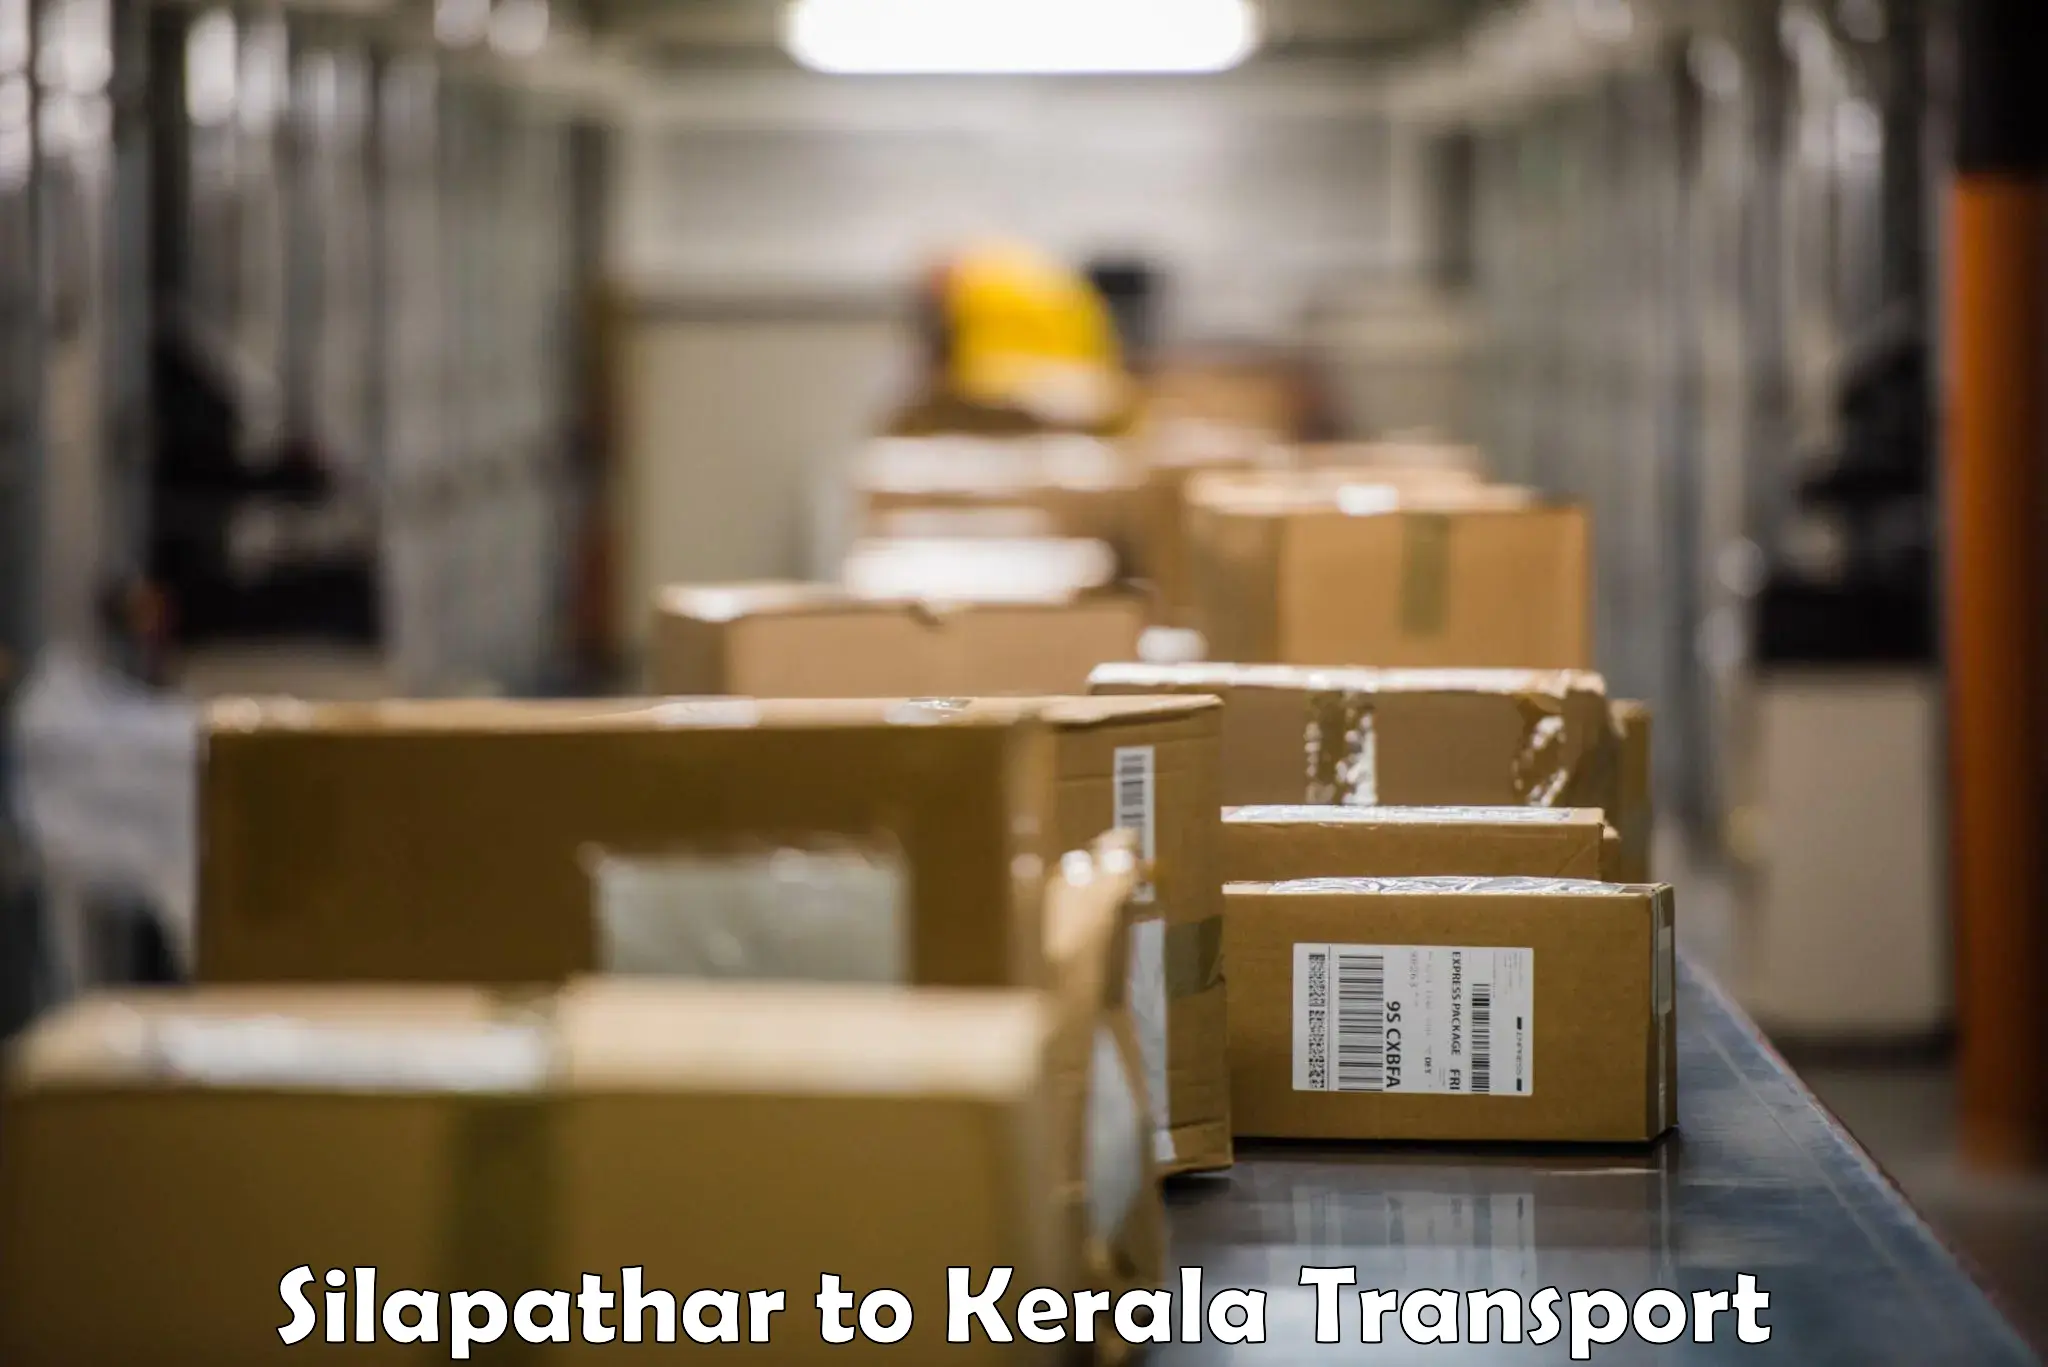 Truck transport companies in India Silapathar to Cochin